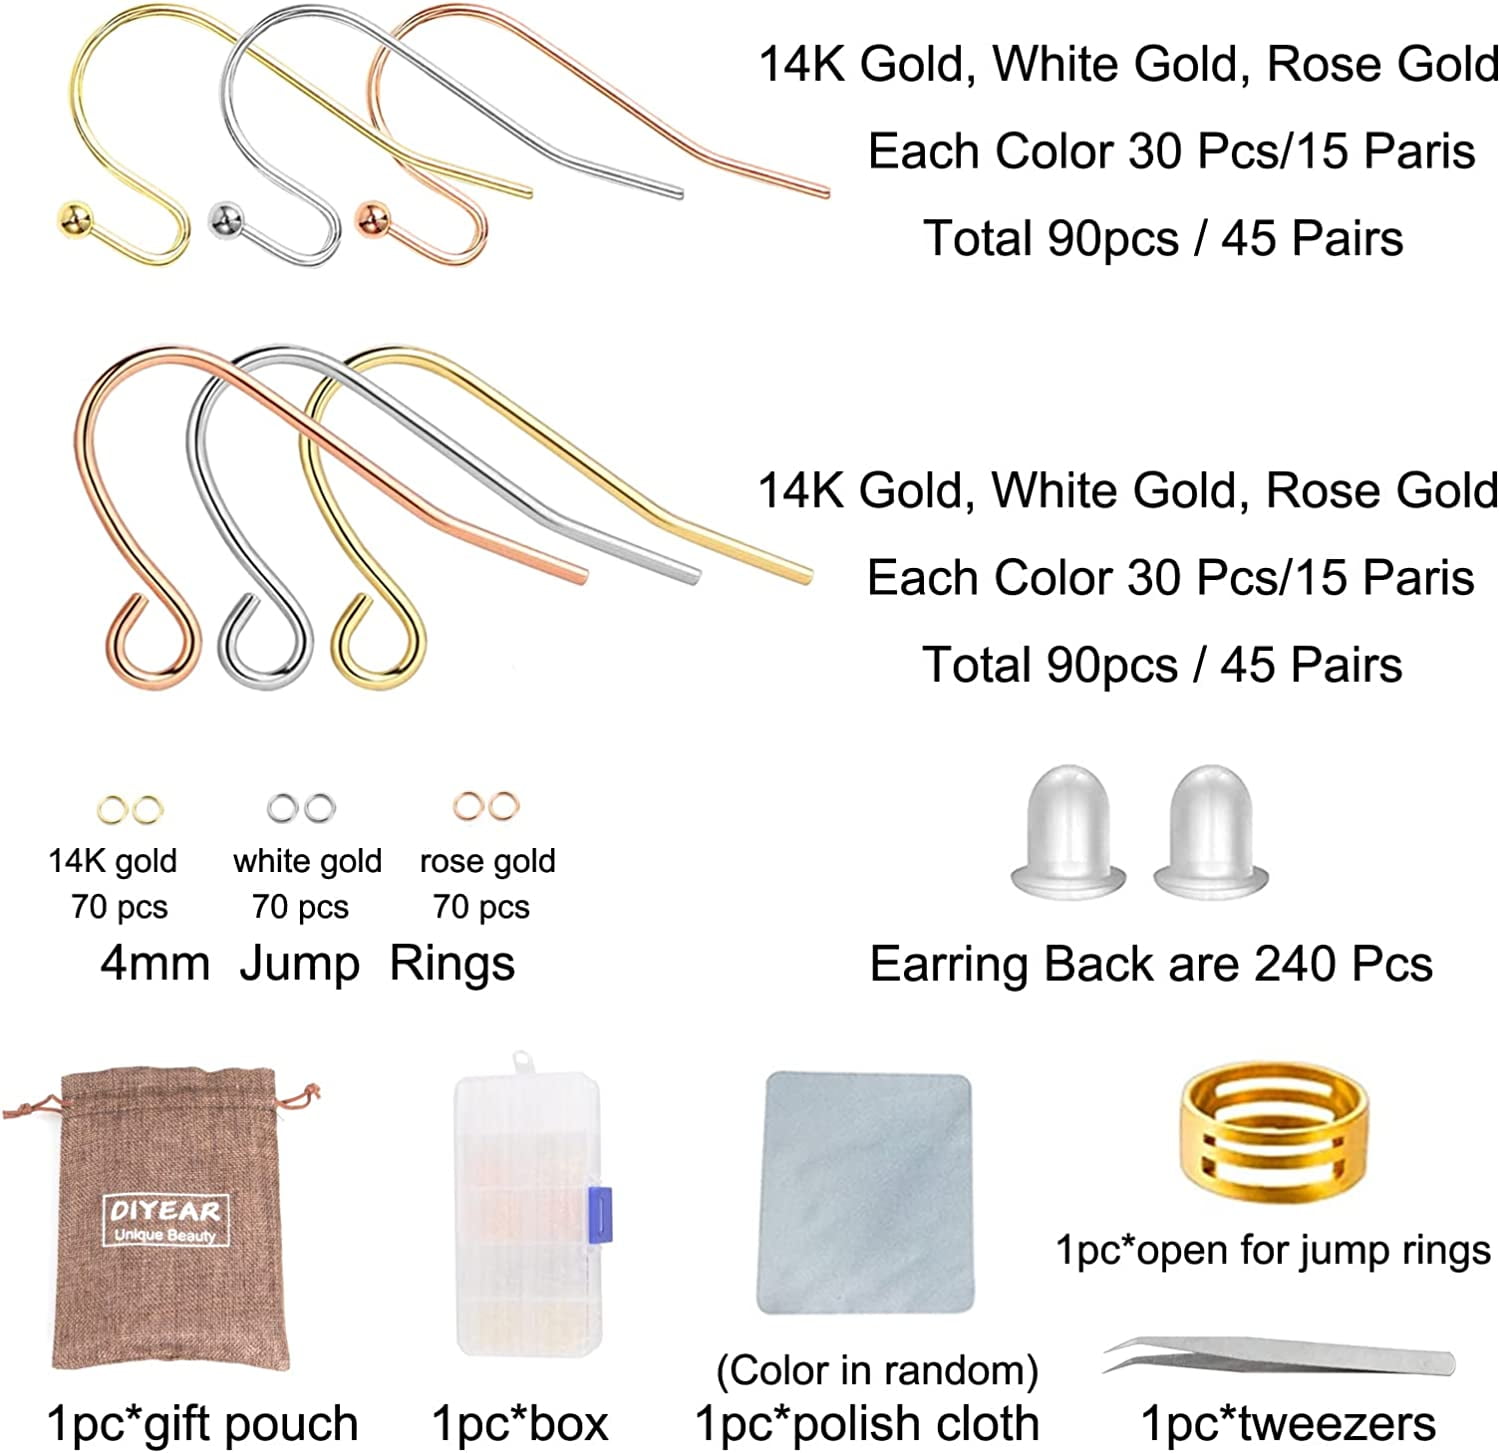 Rose Gold Earring Hooks, 240Pcs Earring Making Kit with Hypoallergenic  Earring Hooks, Jump Rings and Clear Rubber Earring Backs for DIY Jewelry  Making